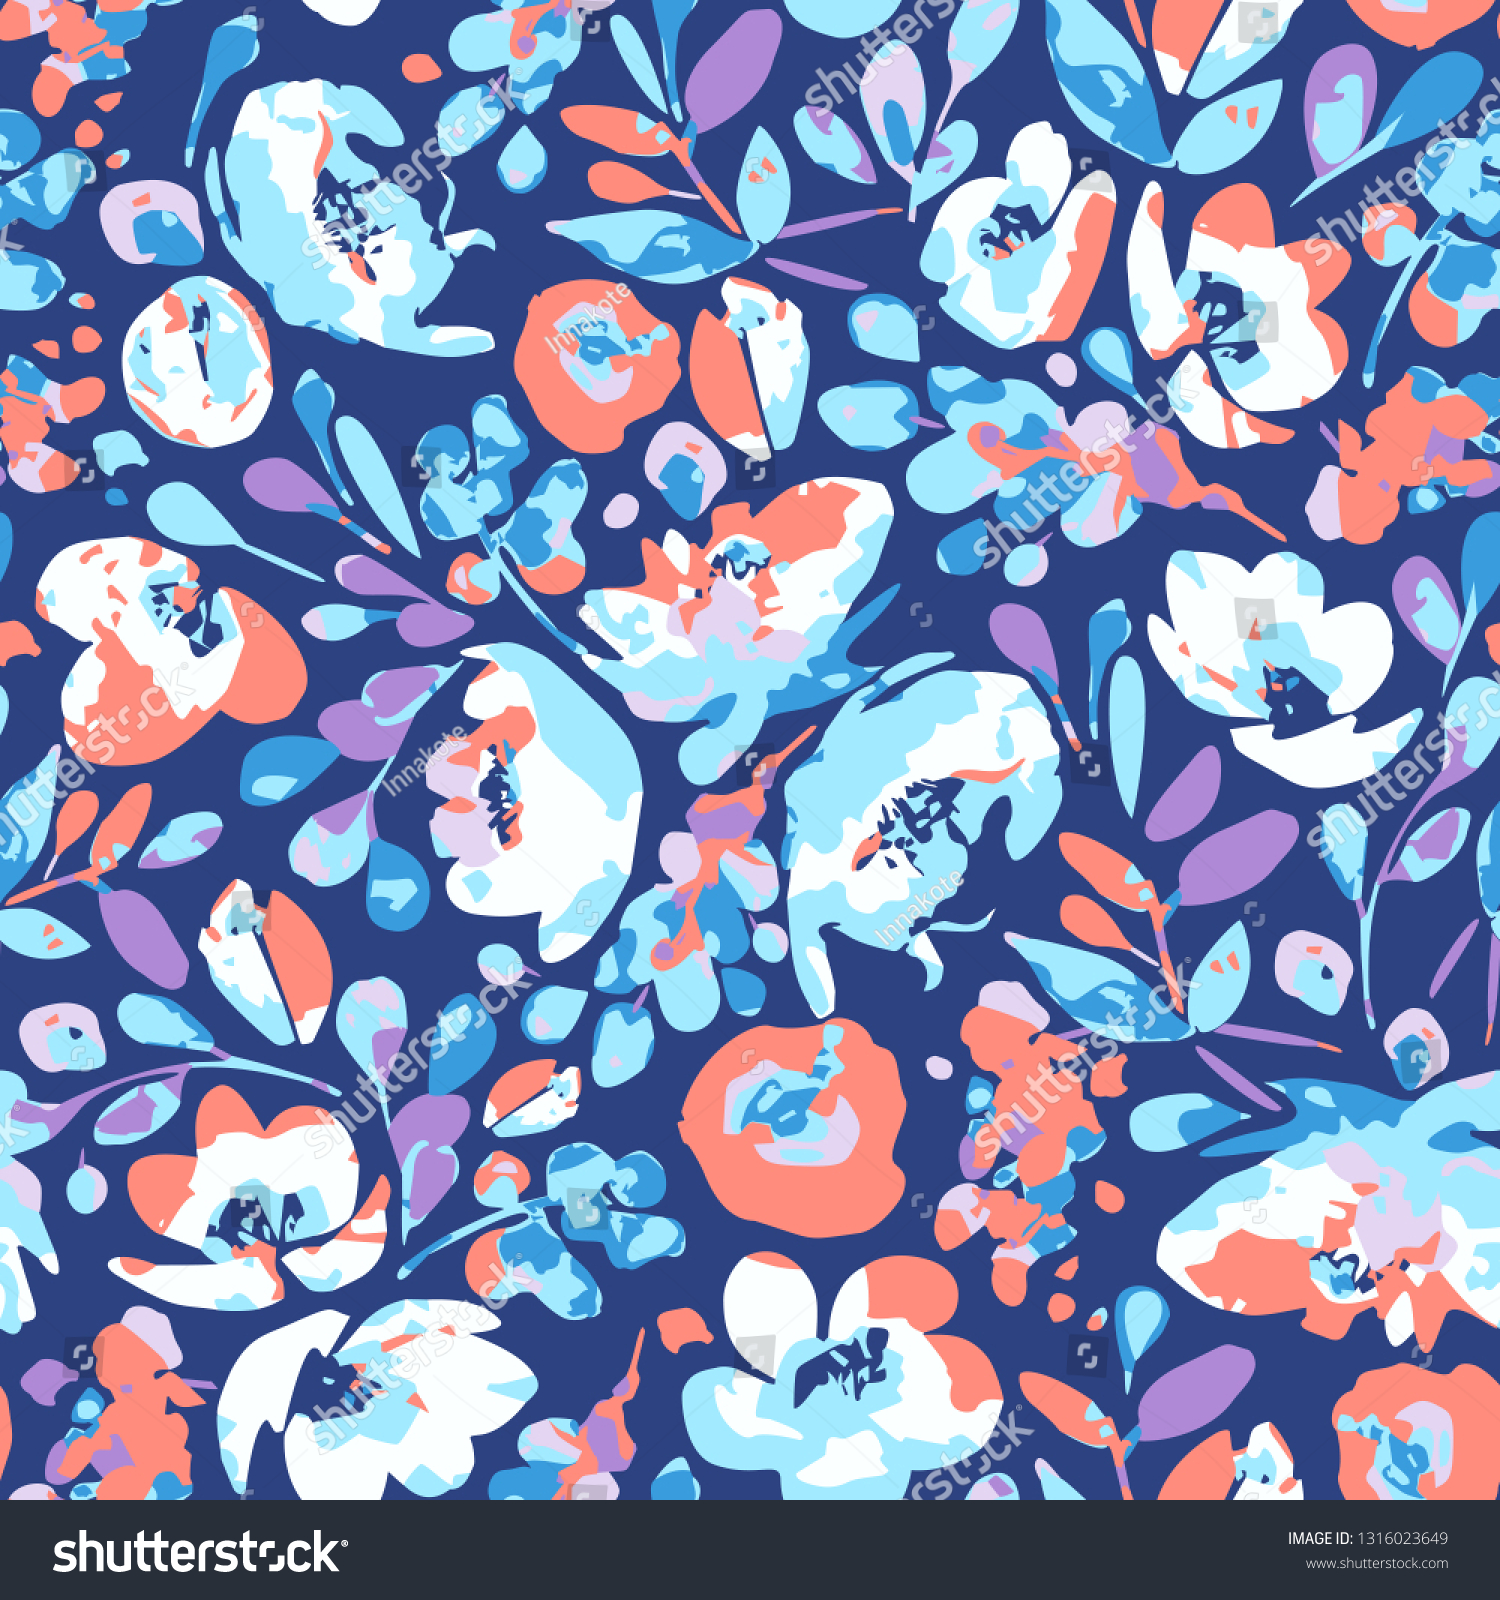 SVG of Vector seamless pattern, blooming absract white, blue flowers and violet, coral foliage. Illustration with floral composition on navy background. Use in textiles, interior, wrapping paper. svg